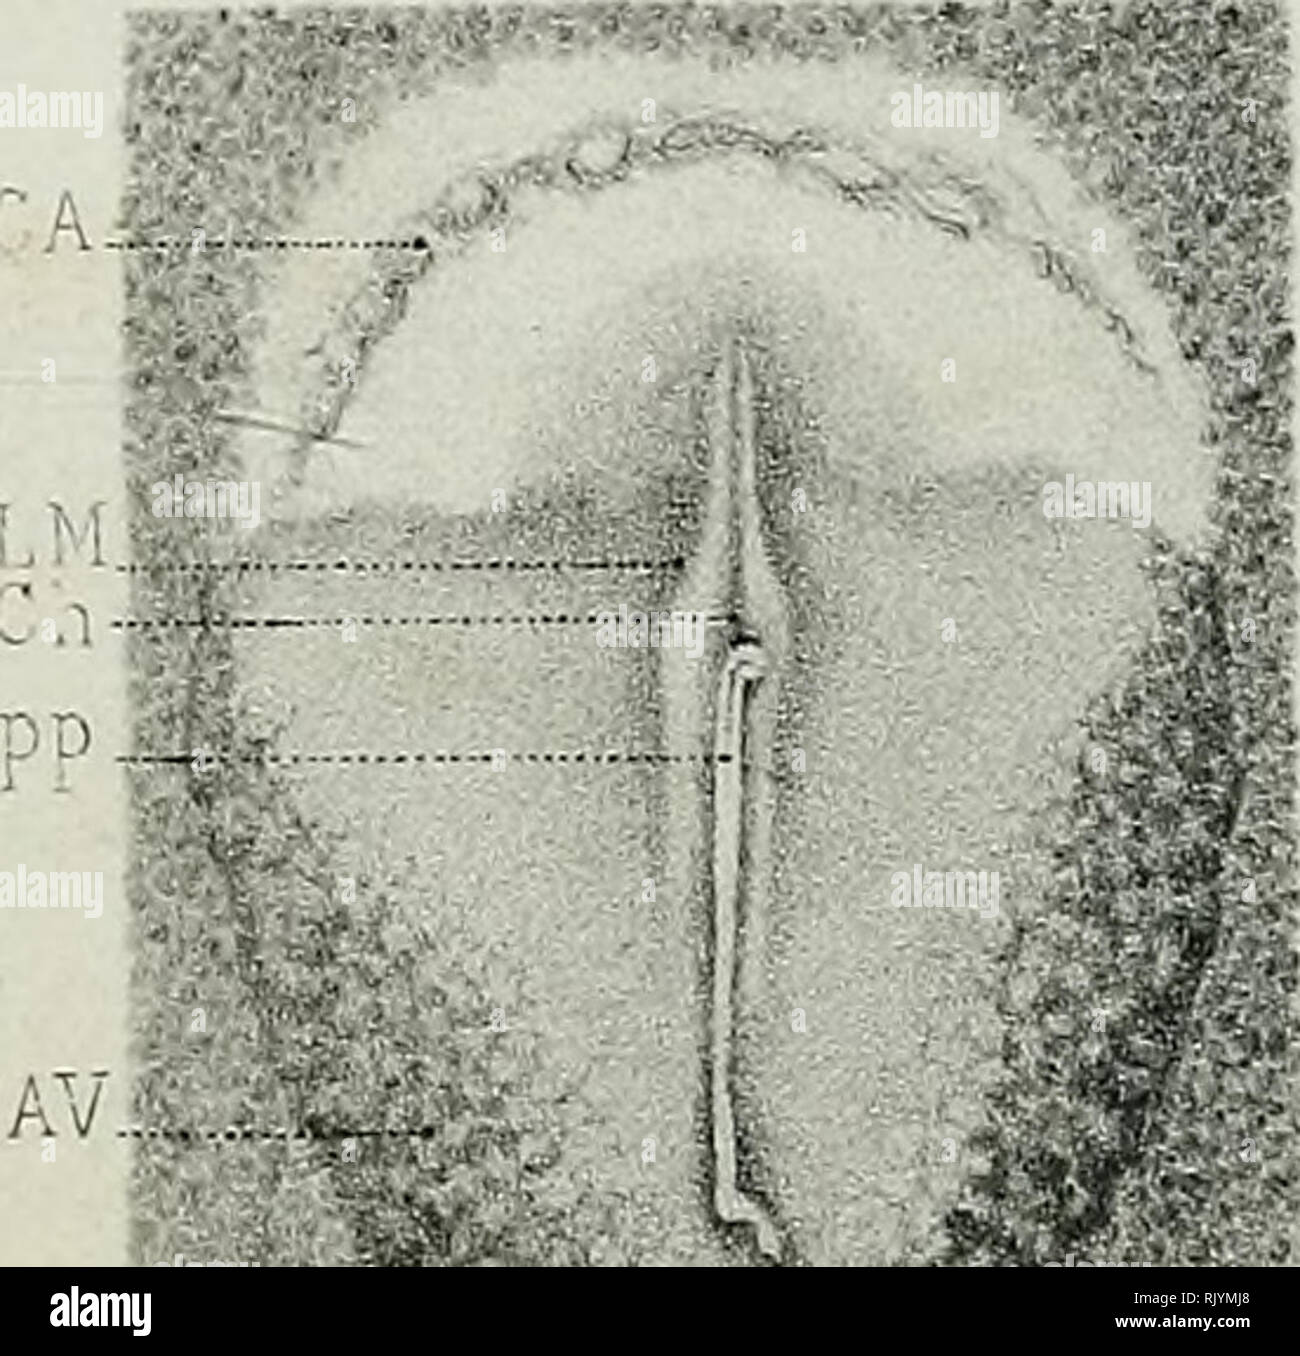 Atlas D Embryologie Embryology I Mjj L Avi M I Fig 69 Iq B Fig 75 1 4 Please Note That These Images Are Extracted From Scanned Page Images That May Have Been